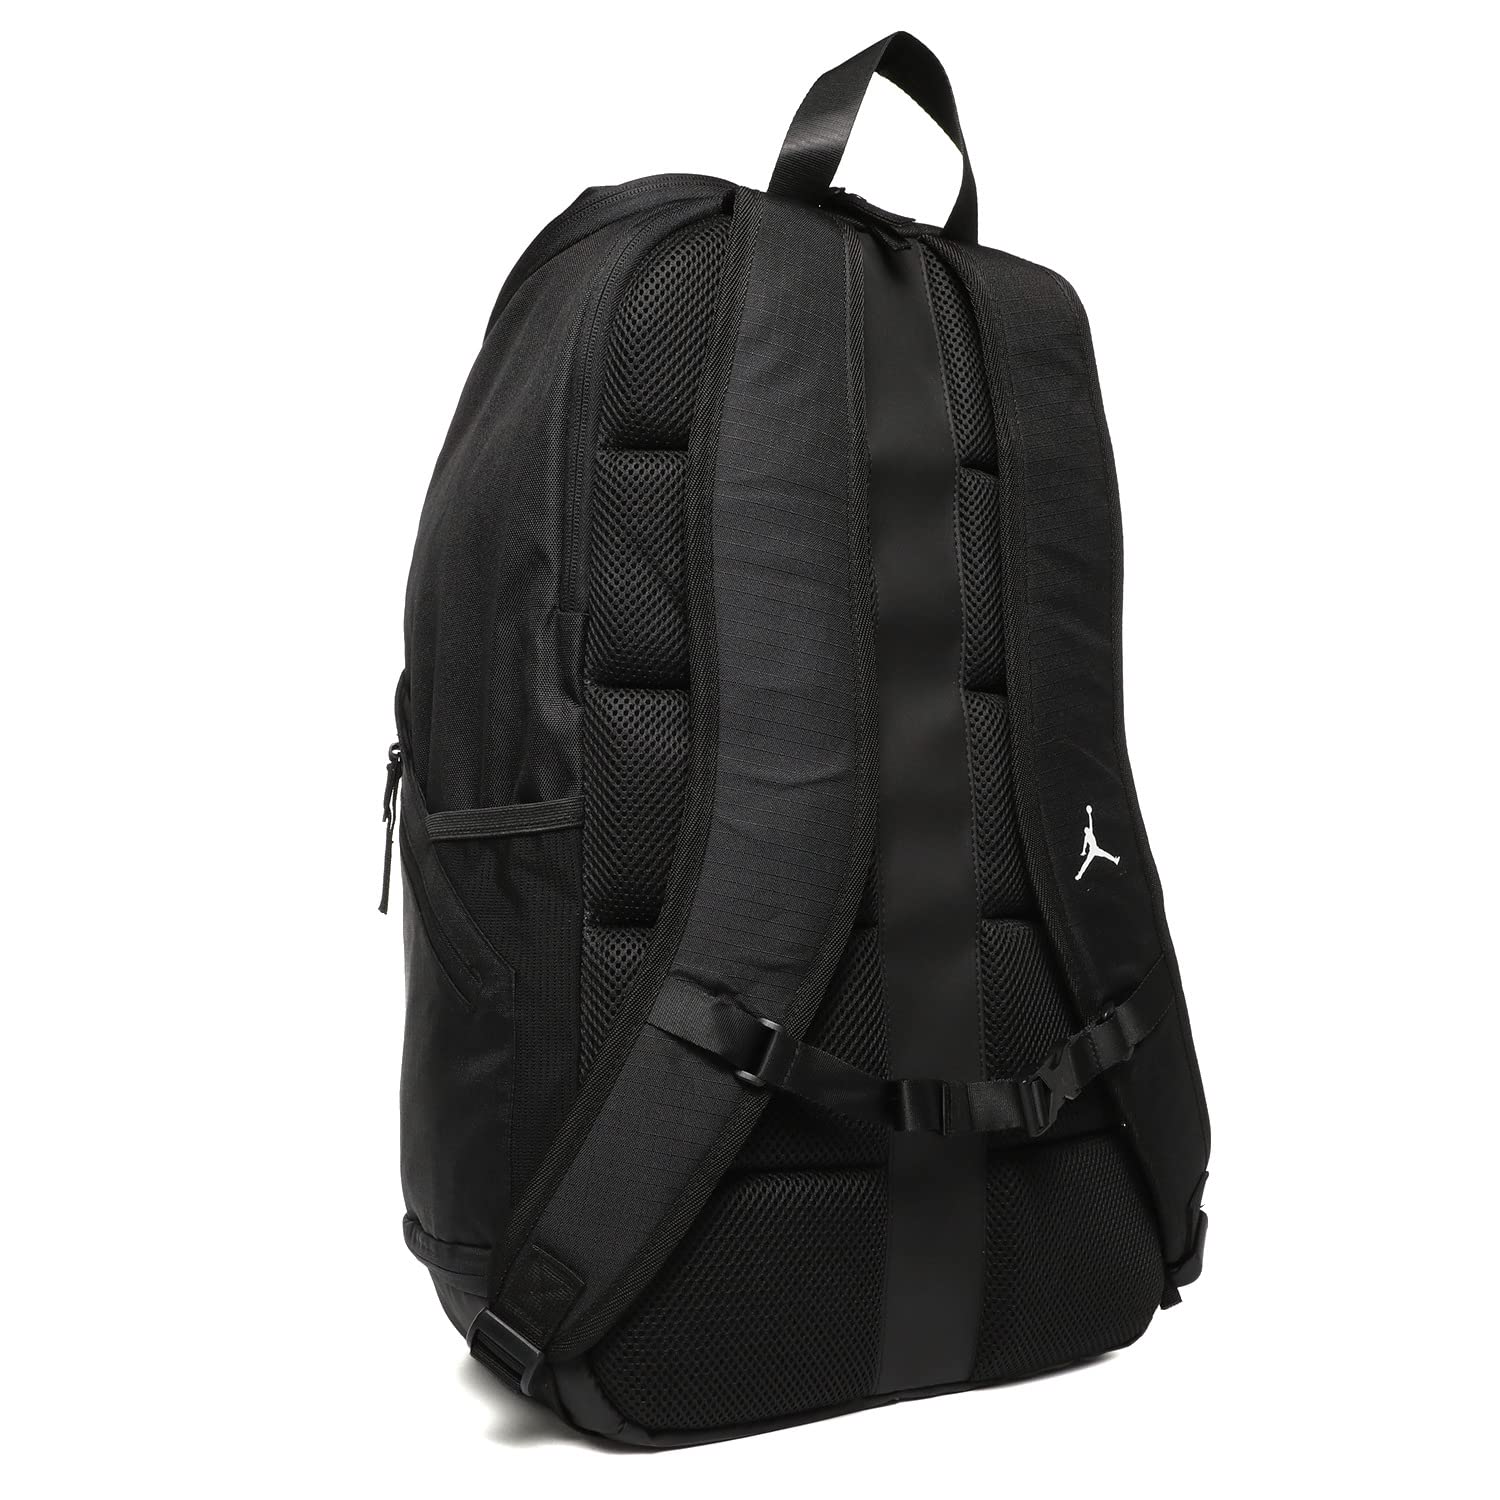 Image 2 of Zion Velocity Backpack (Big Kid)